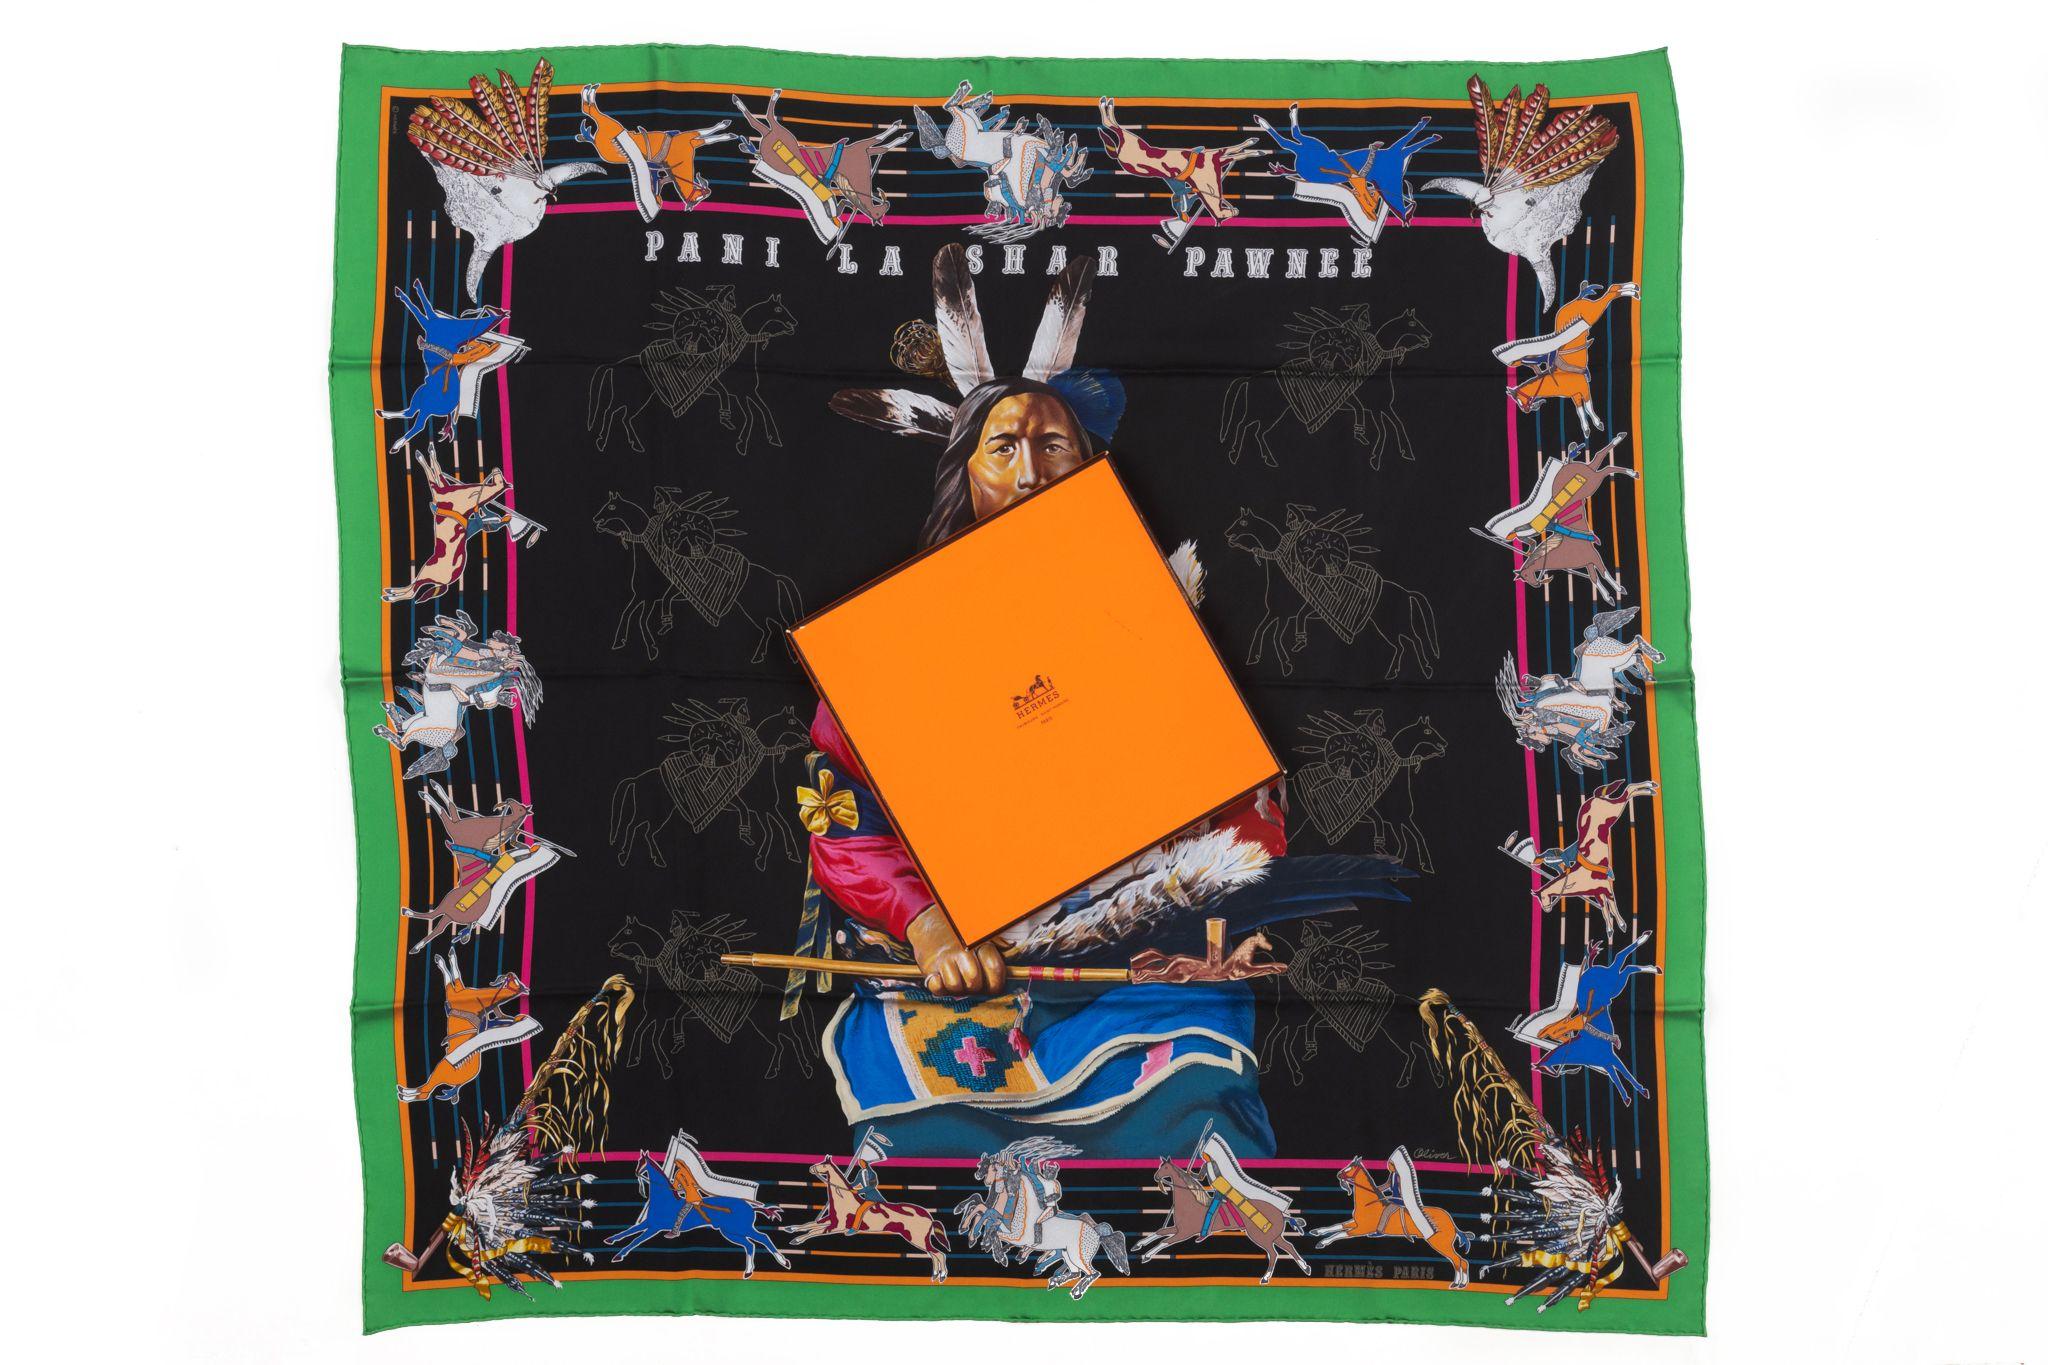 Hermes Kermit Oliver Pawnee Scarf new in the original scarf. Very collectible piece and rare to find.